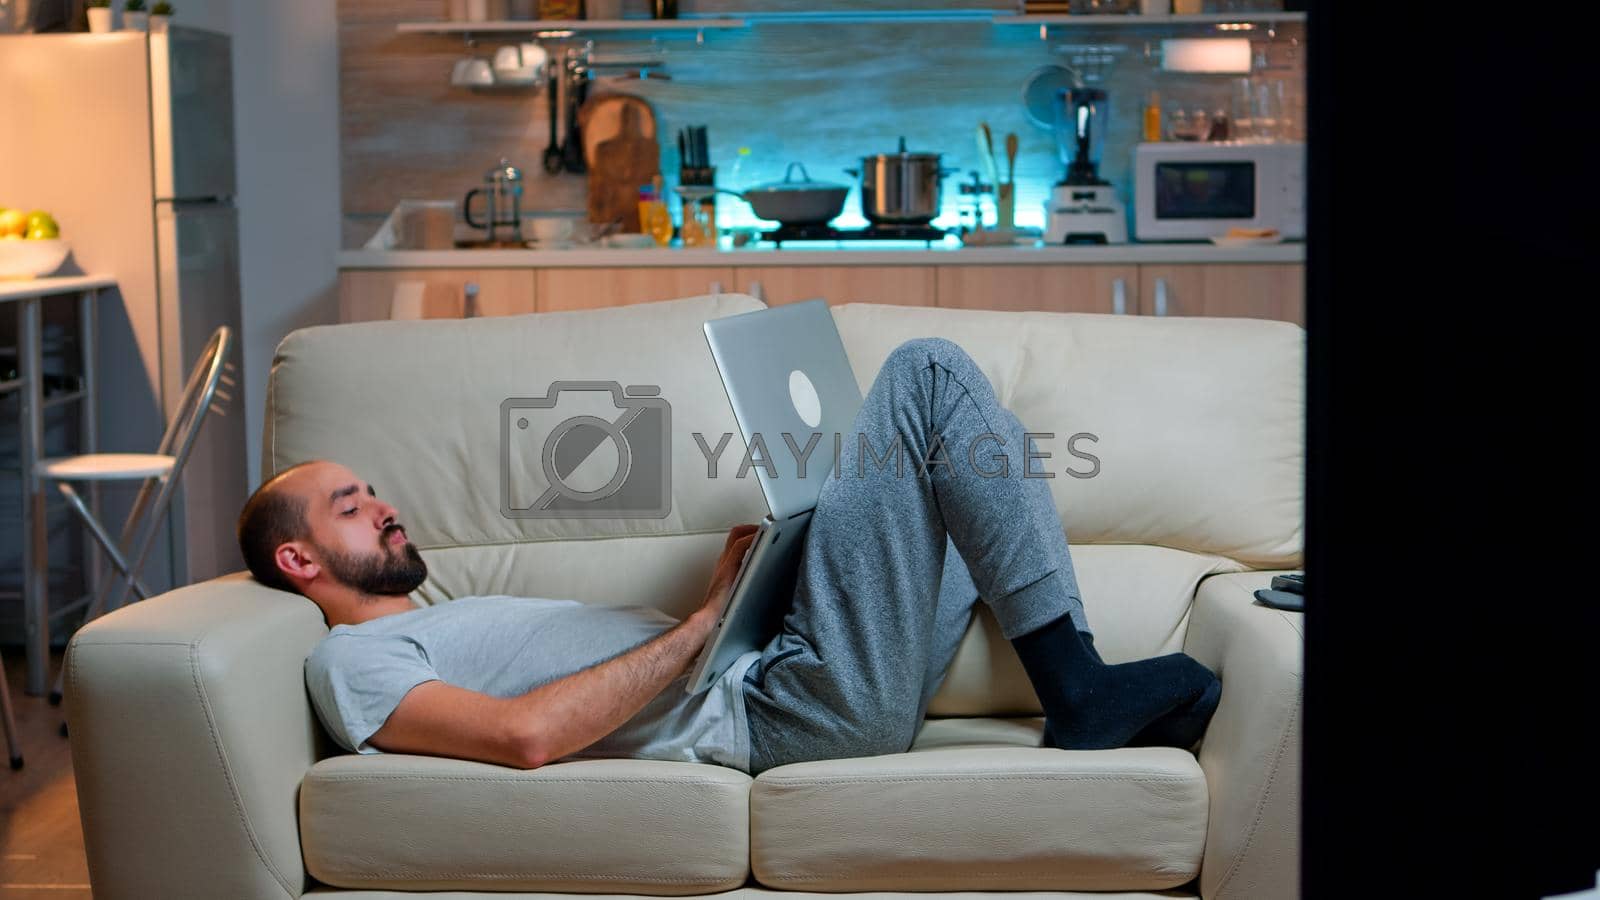 Exhausted man falling asleep while working on internet communication project using laptop computer with modern technology wireless. Caucasian male in pajamas sitting on sofa late at night in kitchen